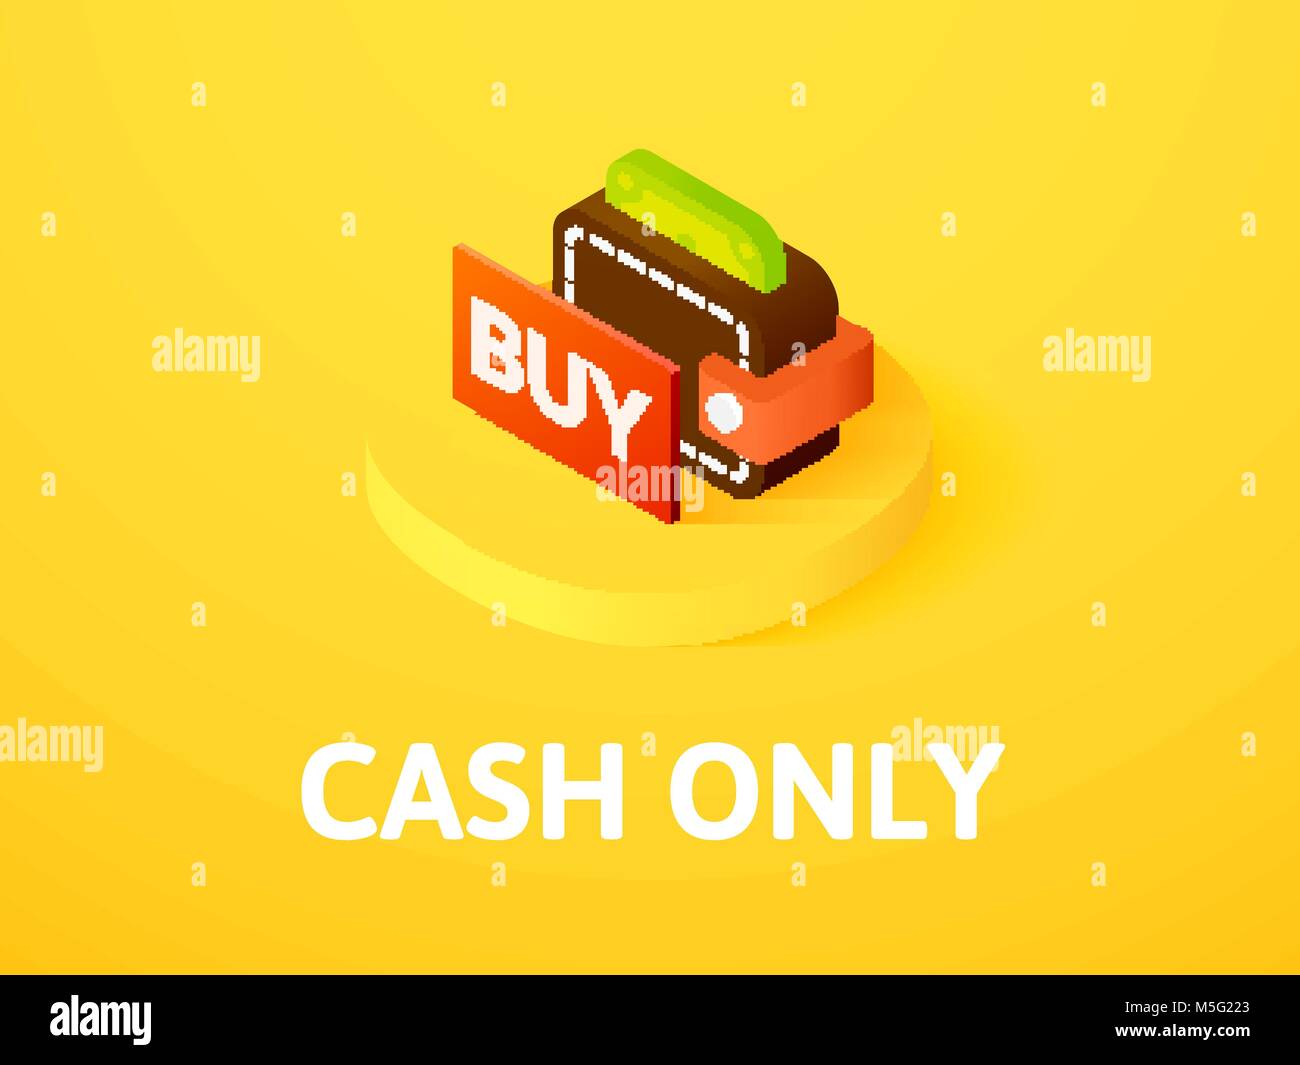 Cash only isometric icon, isolated on color background Stock Vector